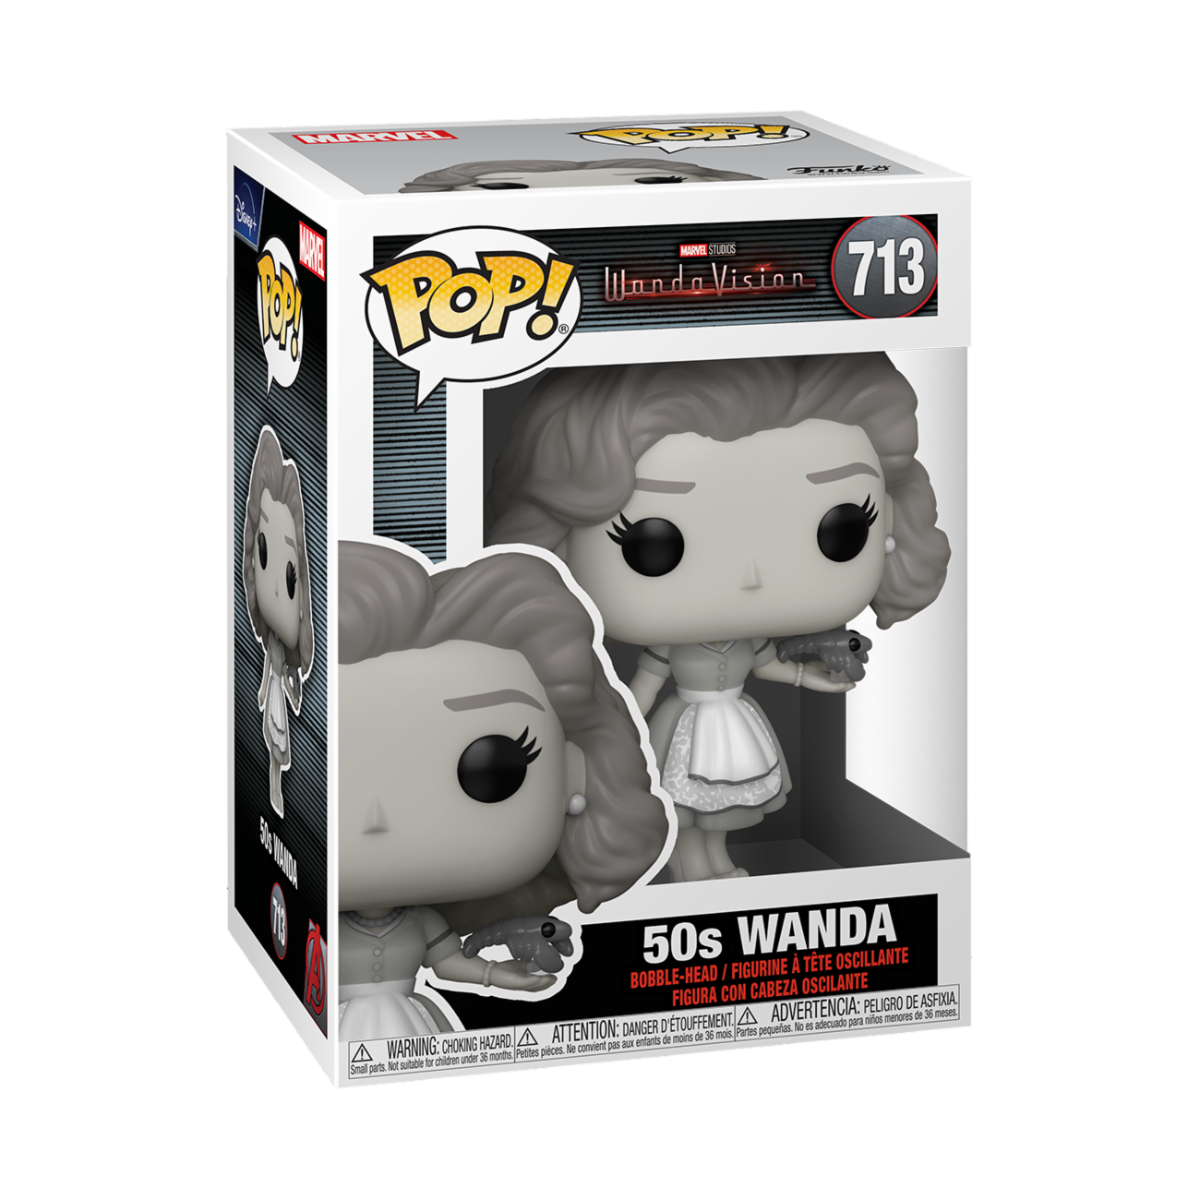  50'S WANDA FUNKO POP MARVEL WANDAVISION ELIZABETH OLSEN #713</p> In Stock</p><BR>In Stock<BR>In Stock Safety Information<br>Warning: Not suitable for children under 3 years. Small Parts. 